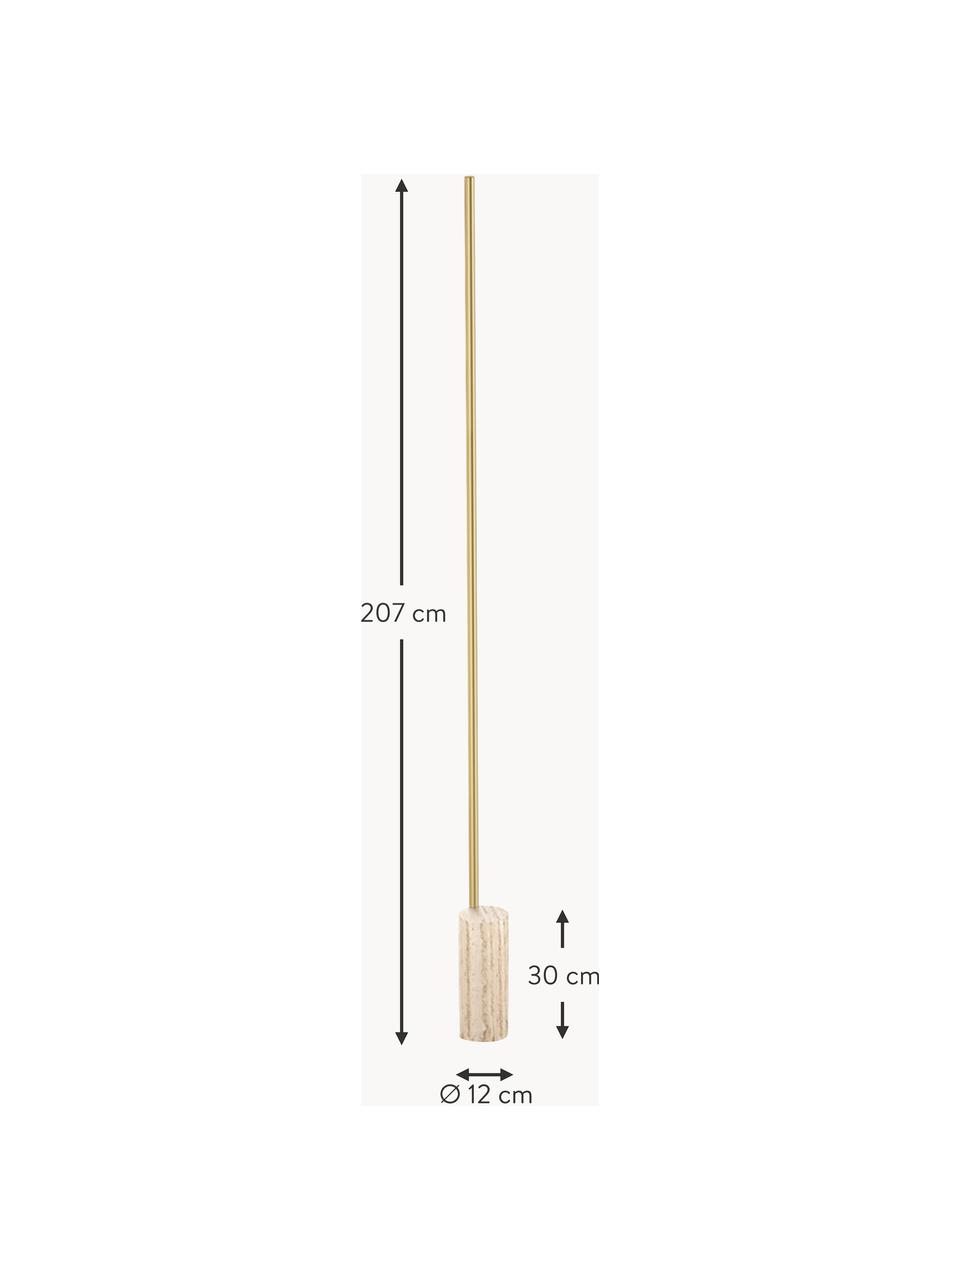 Dimmbare LED-Stehlampe Hilow Line mit Marmorfuss, Goldfarben, Beige, marmoriert, H 207 cm